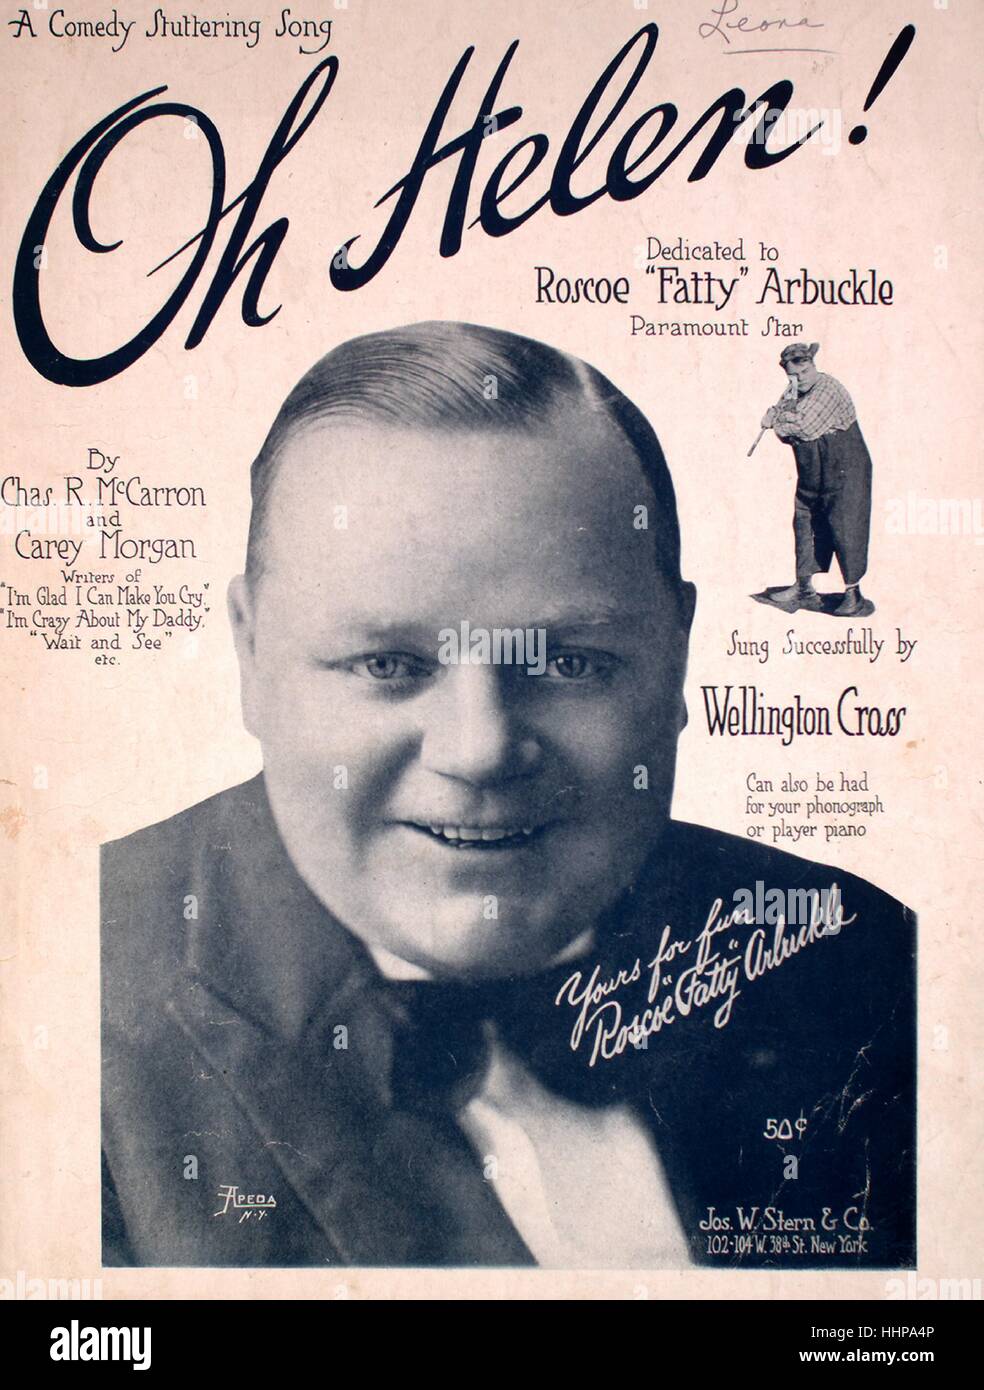 Sheet music cover image of the song 'Oh Helen! A Comedy Stuttering Song', with original authorship notes reading 'by Chas R McCarron and Carey Morgan', United States, 1918. The publisher is listed as 'Jos. W. Stern and Co., 102-104 W. 38th St.', the form of composition is 'strophic with chorus', the instrumentation is 'piano and voice', the first line reads 'Willie Meek tho' good at grammar', and the illustration artist is listed as 'photo by Apeda, N.Y. of Arbuckle'. Stock Photo